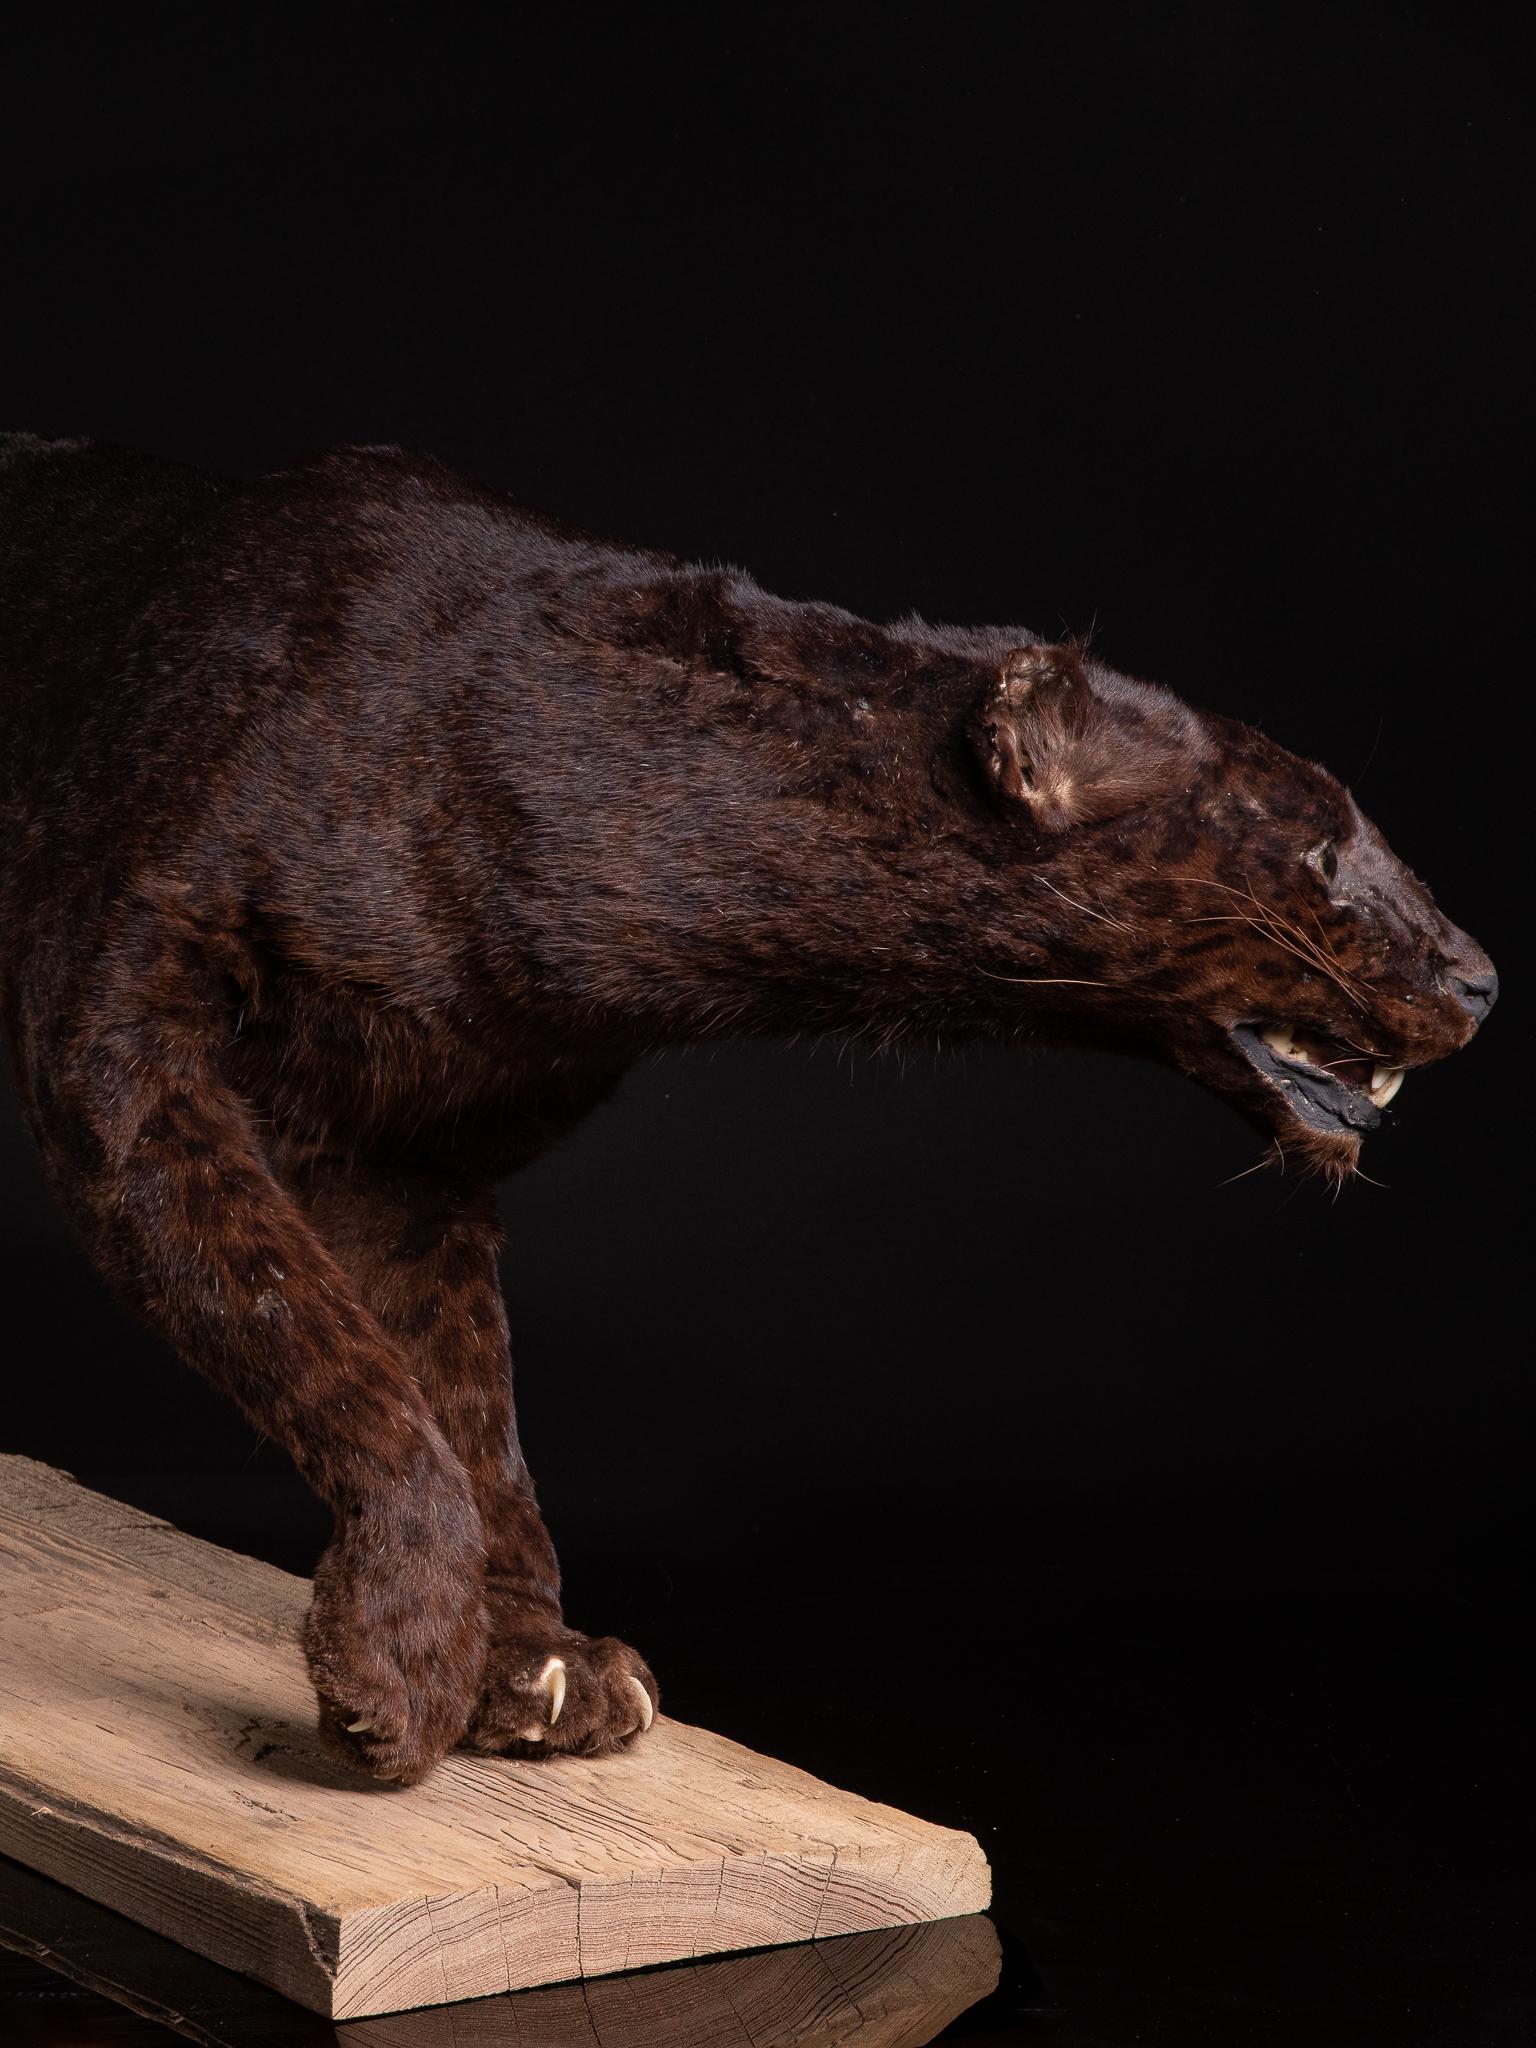 Melanistic leopards are also known as black panthers. In fact, “melanism” is the opposite of the more well-known “albinism”. It is the result of a genetic predisposition that causes an excess of skin or hair pigment. This makes the animal in